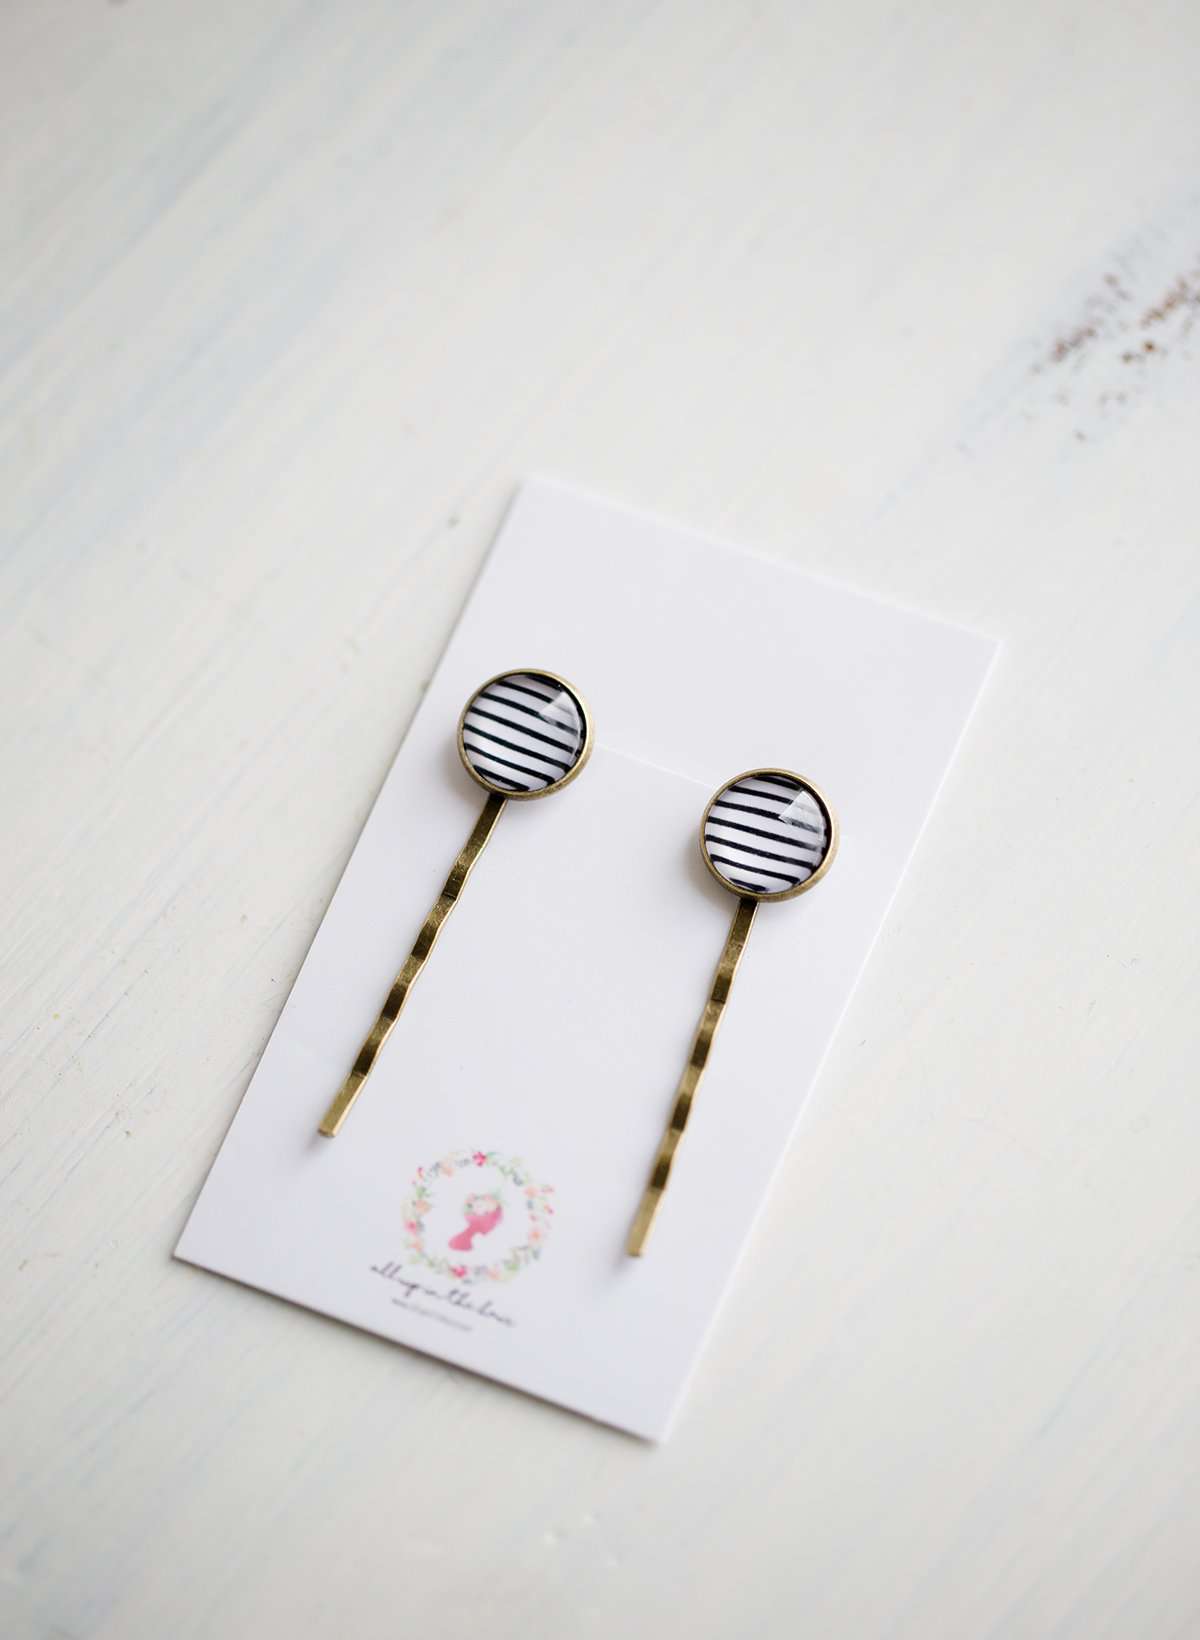 Striped Bobby Pins - FINAL SALE Accessories